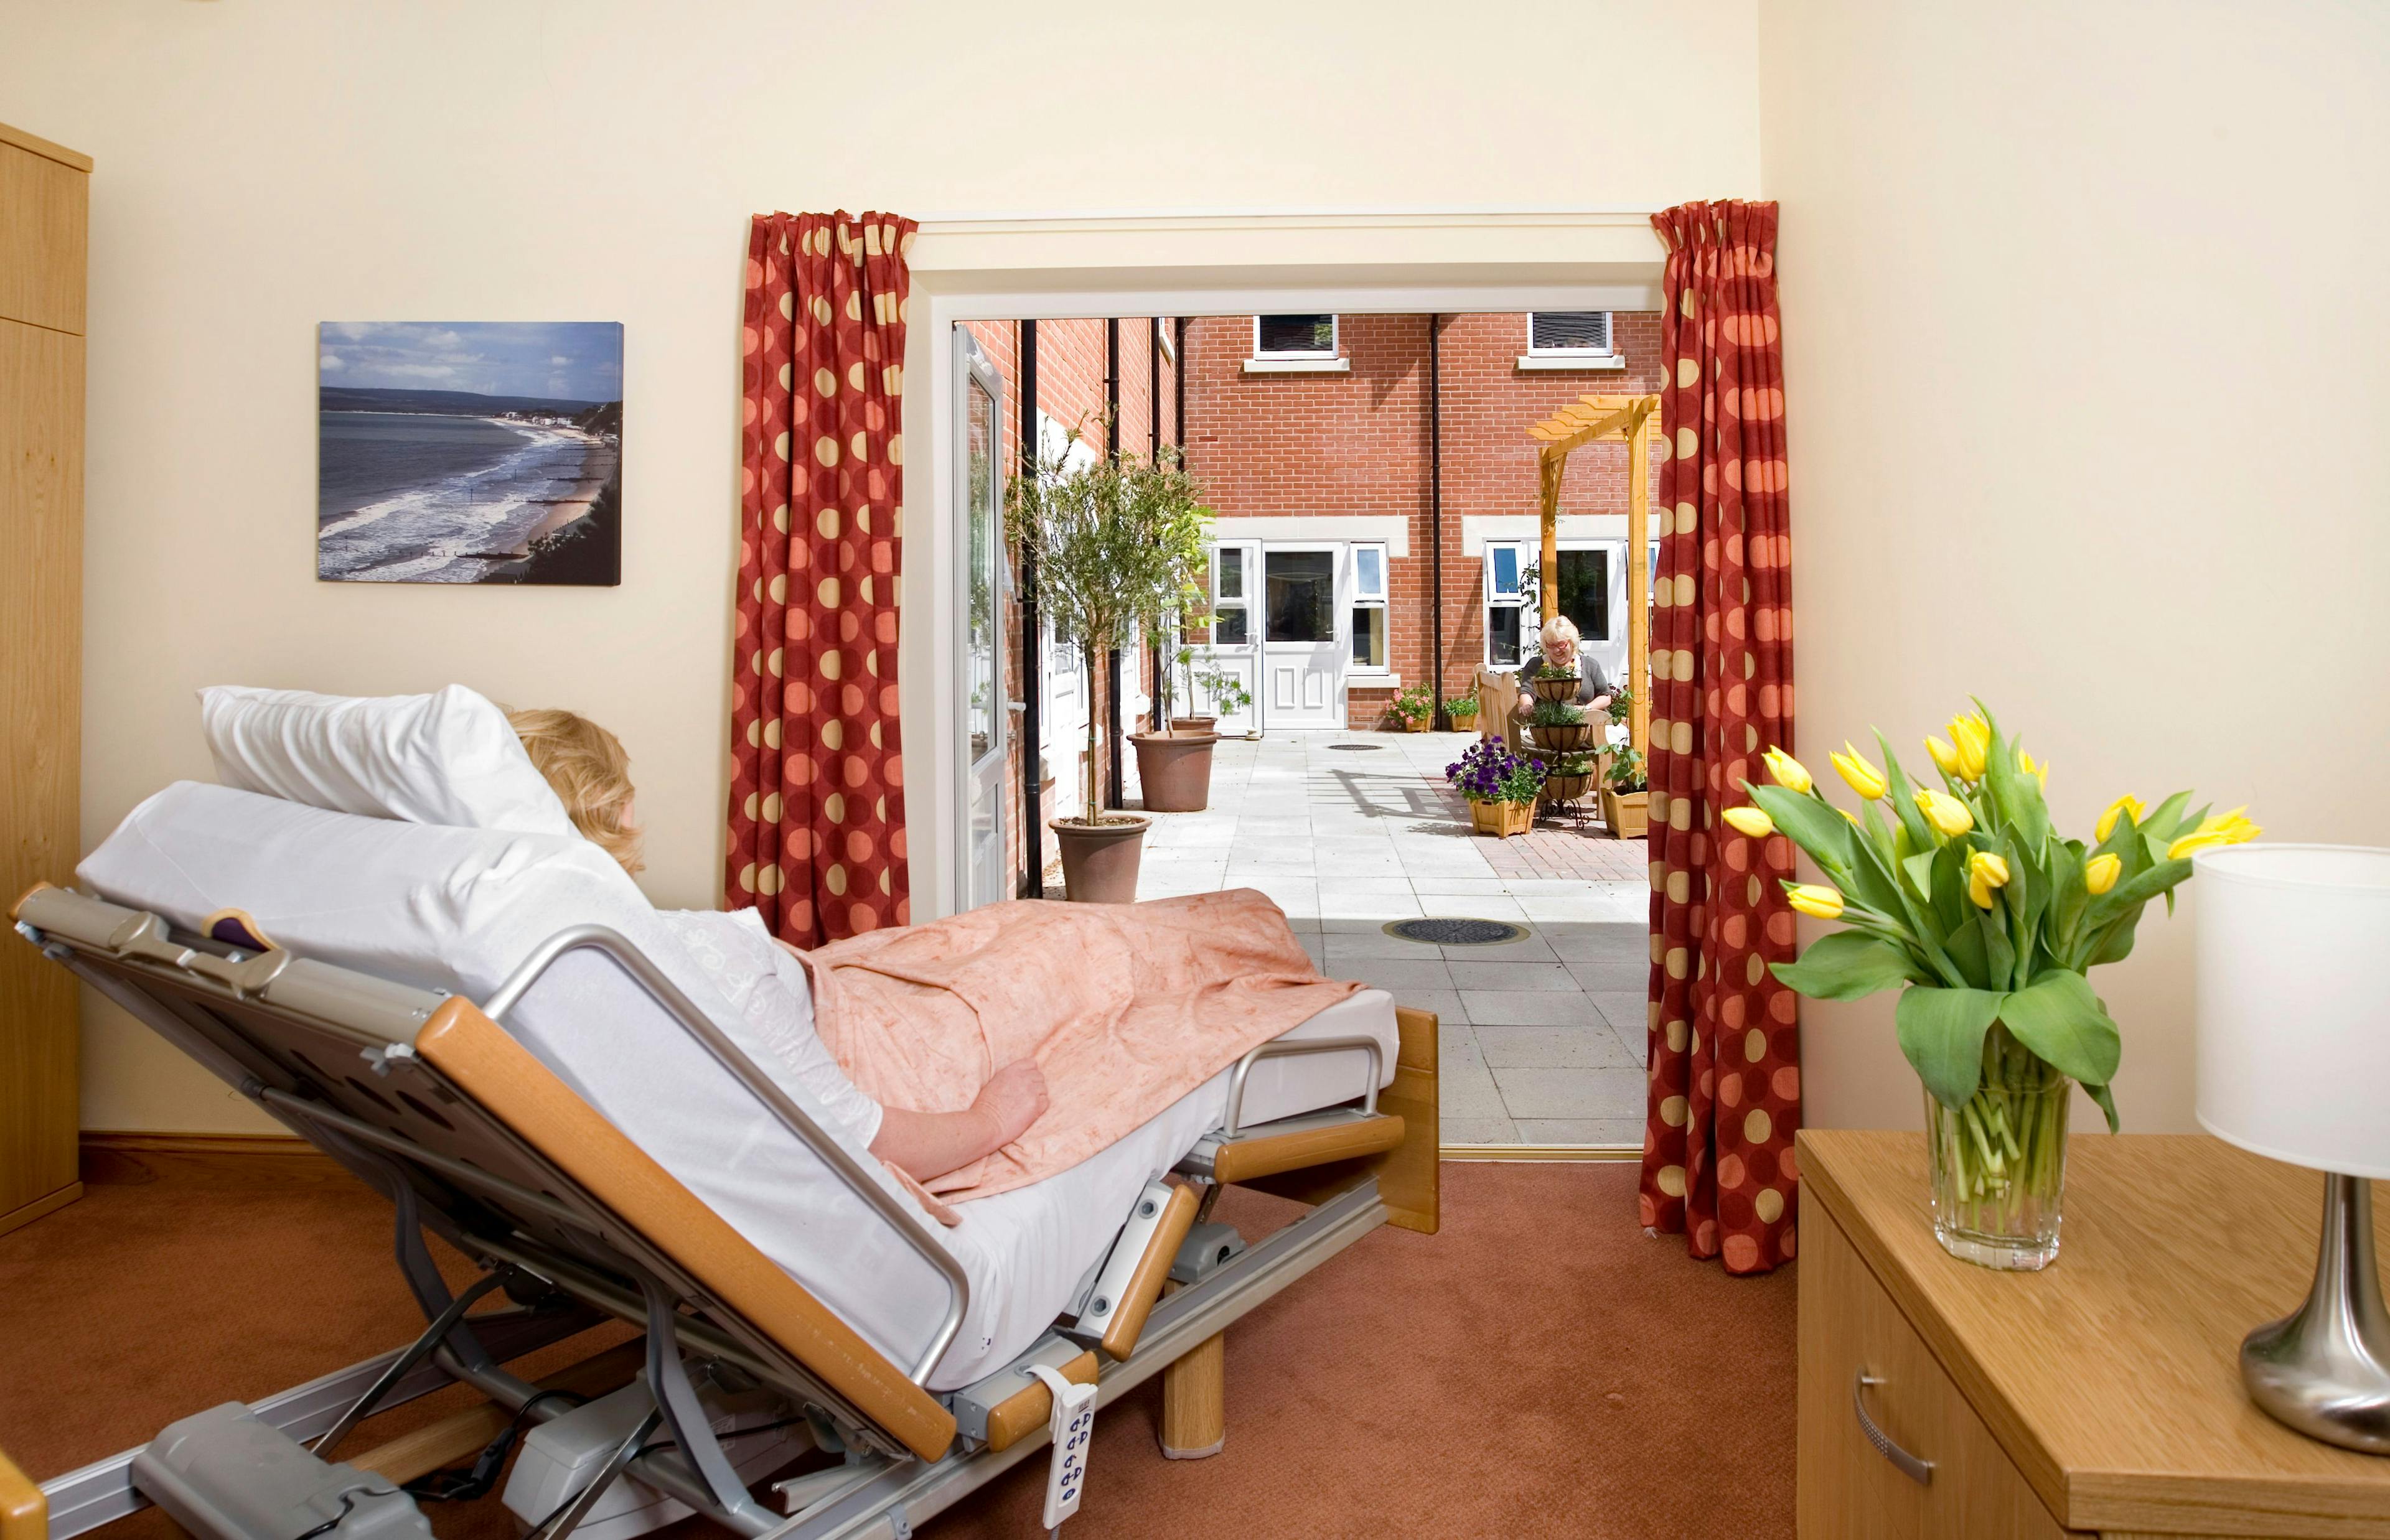 Bedroom of Branksome Park care home in Poole, Dorset